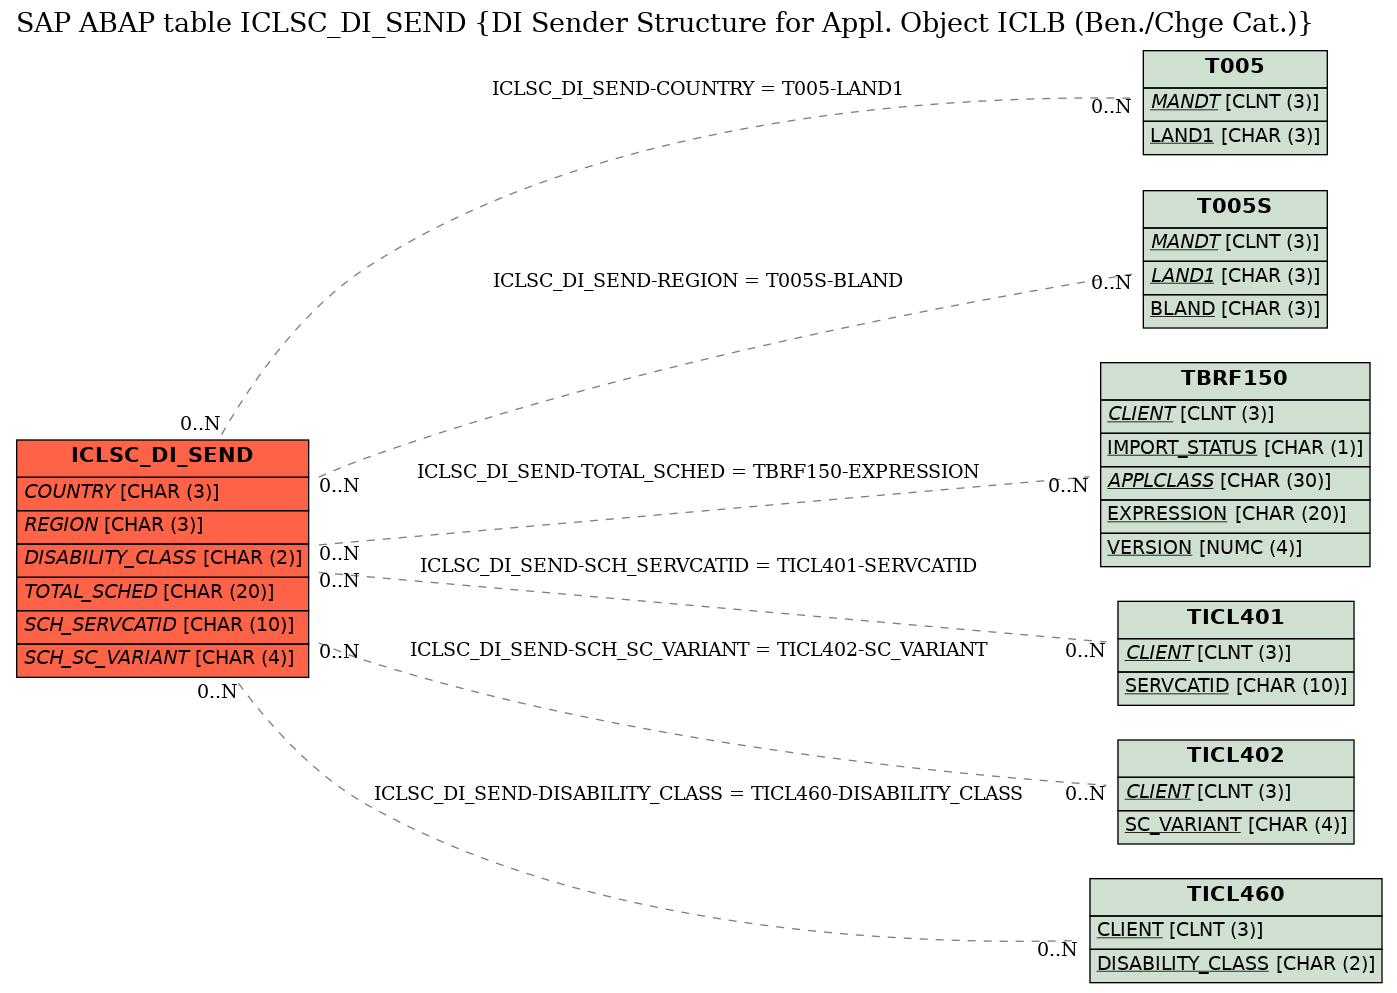 E-R Diagram for table ICLSC_DI_SEND (DI Sender Structure for Appl. Object ICLB (Ben./Chge Cat.))